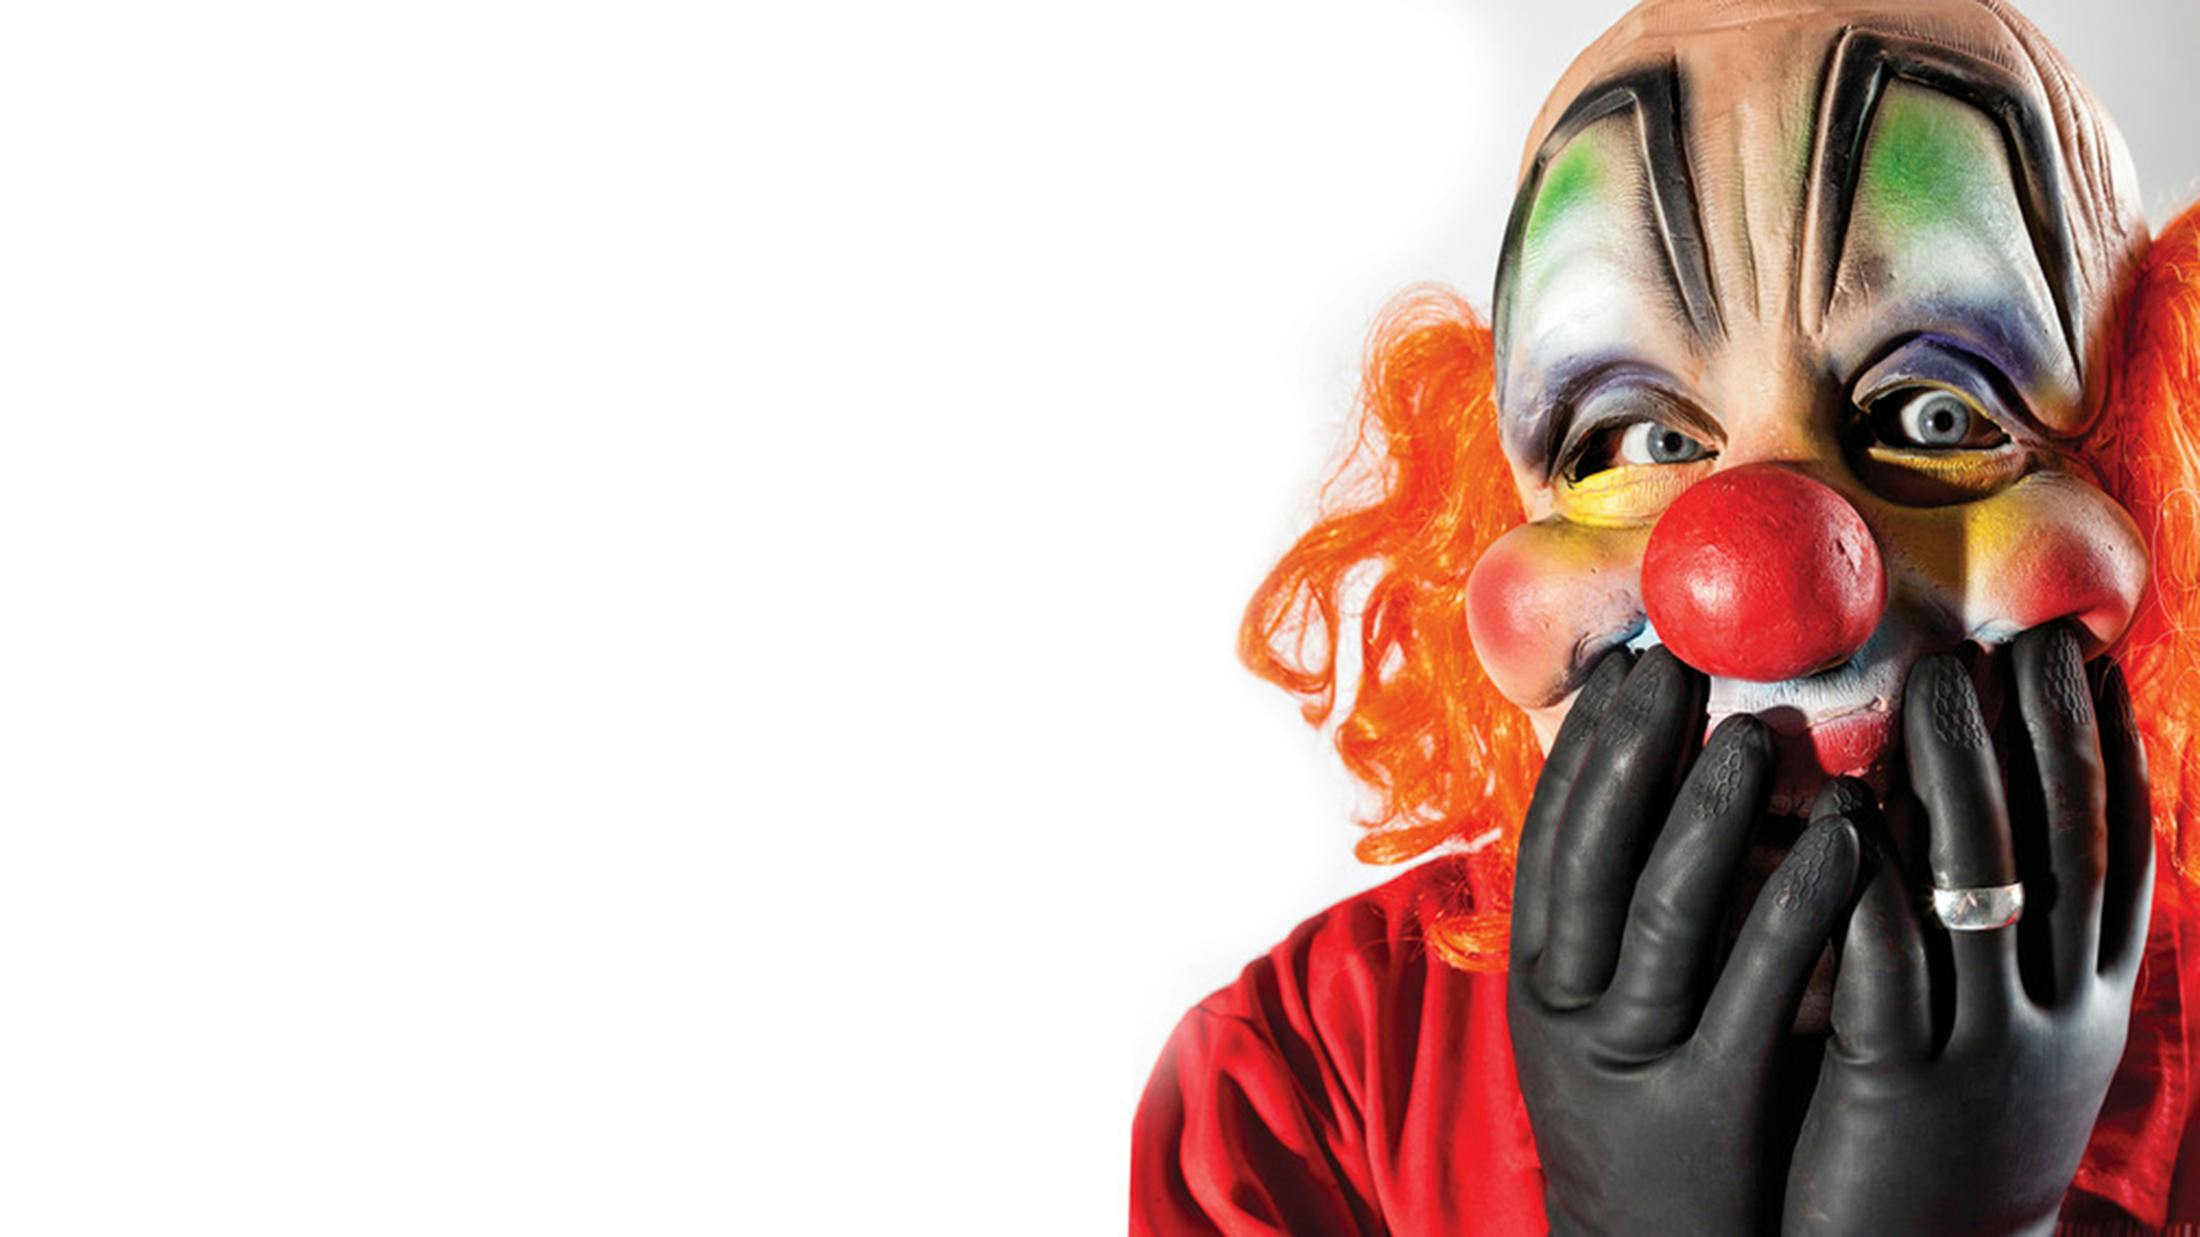 Clown: "There's A Lot Of Love Behind Slipknot's Music"